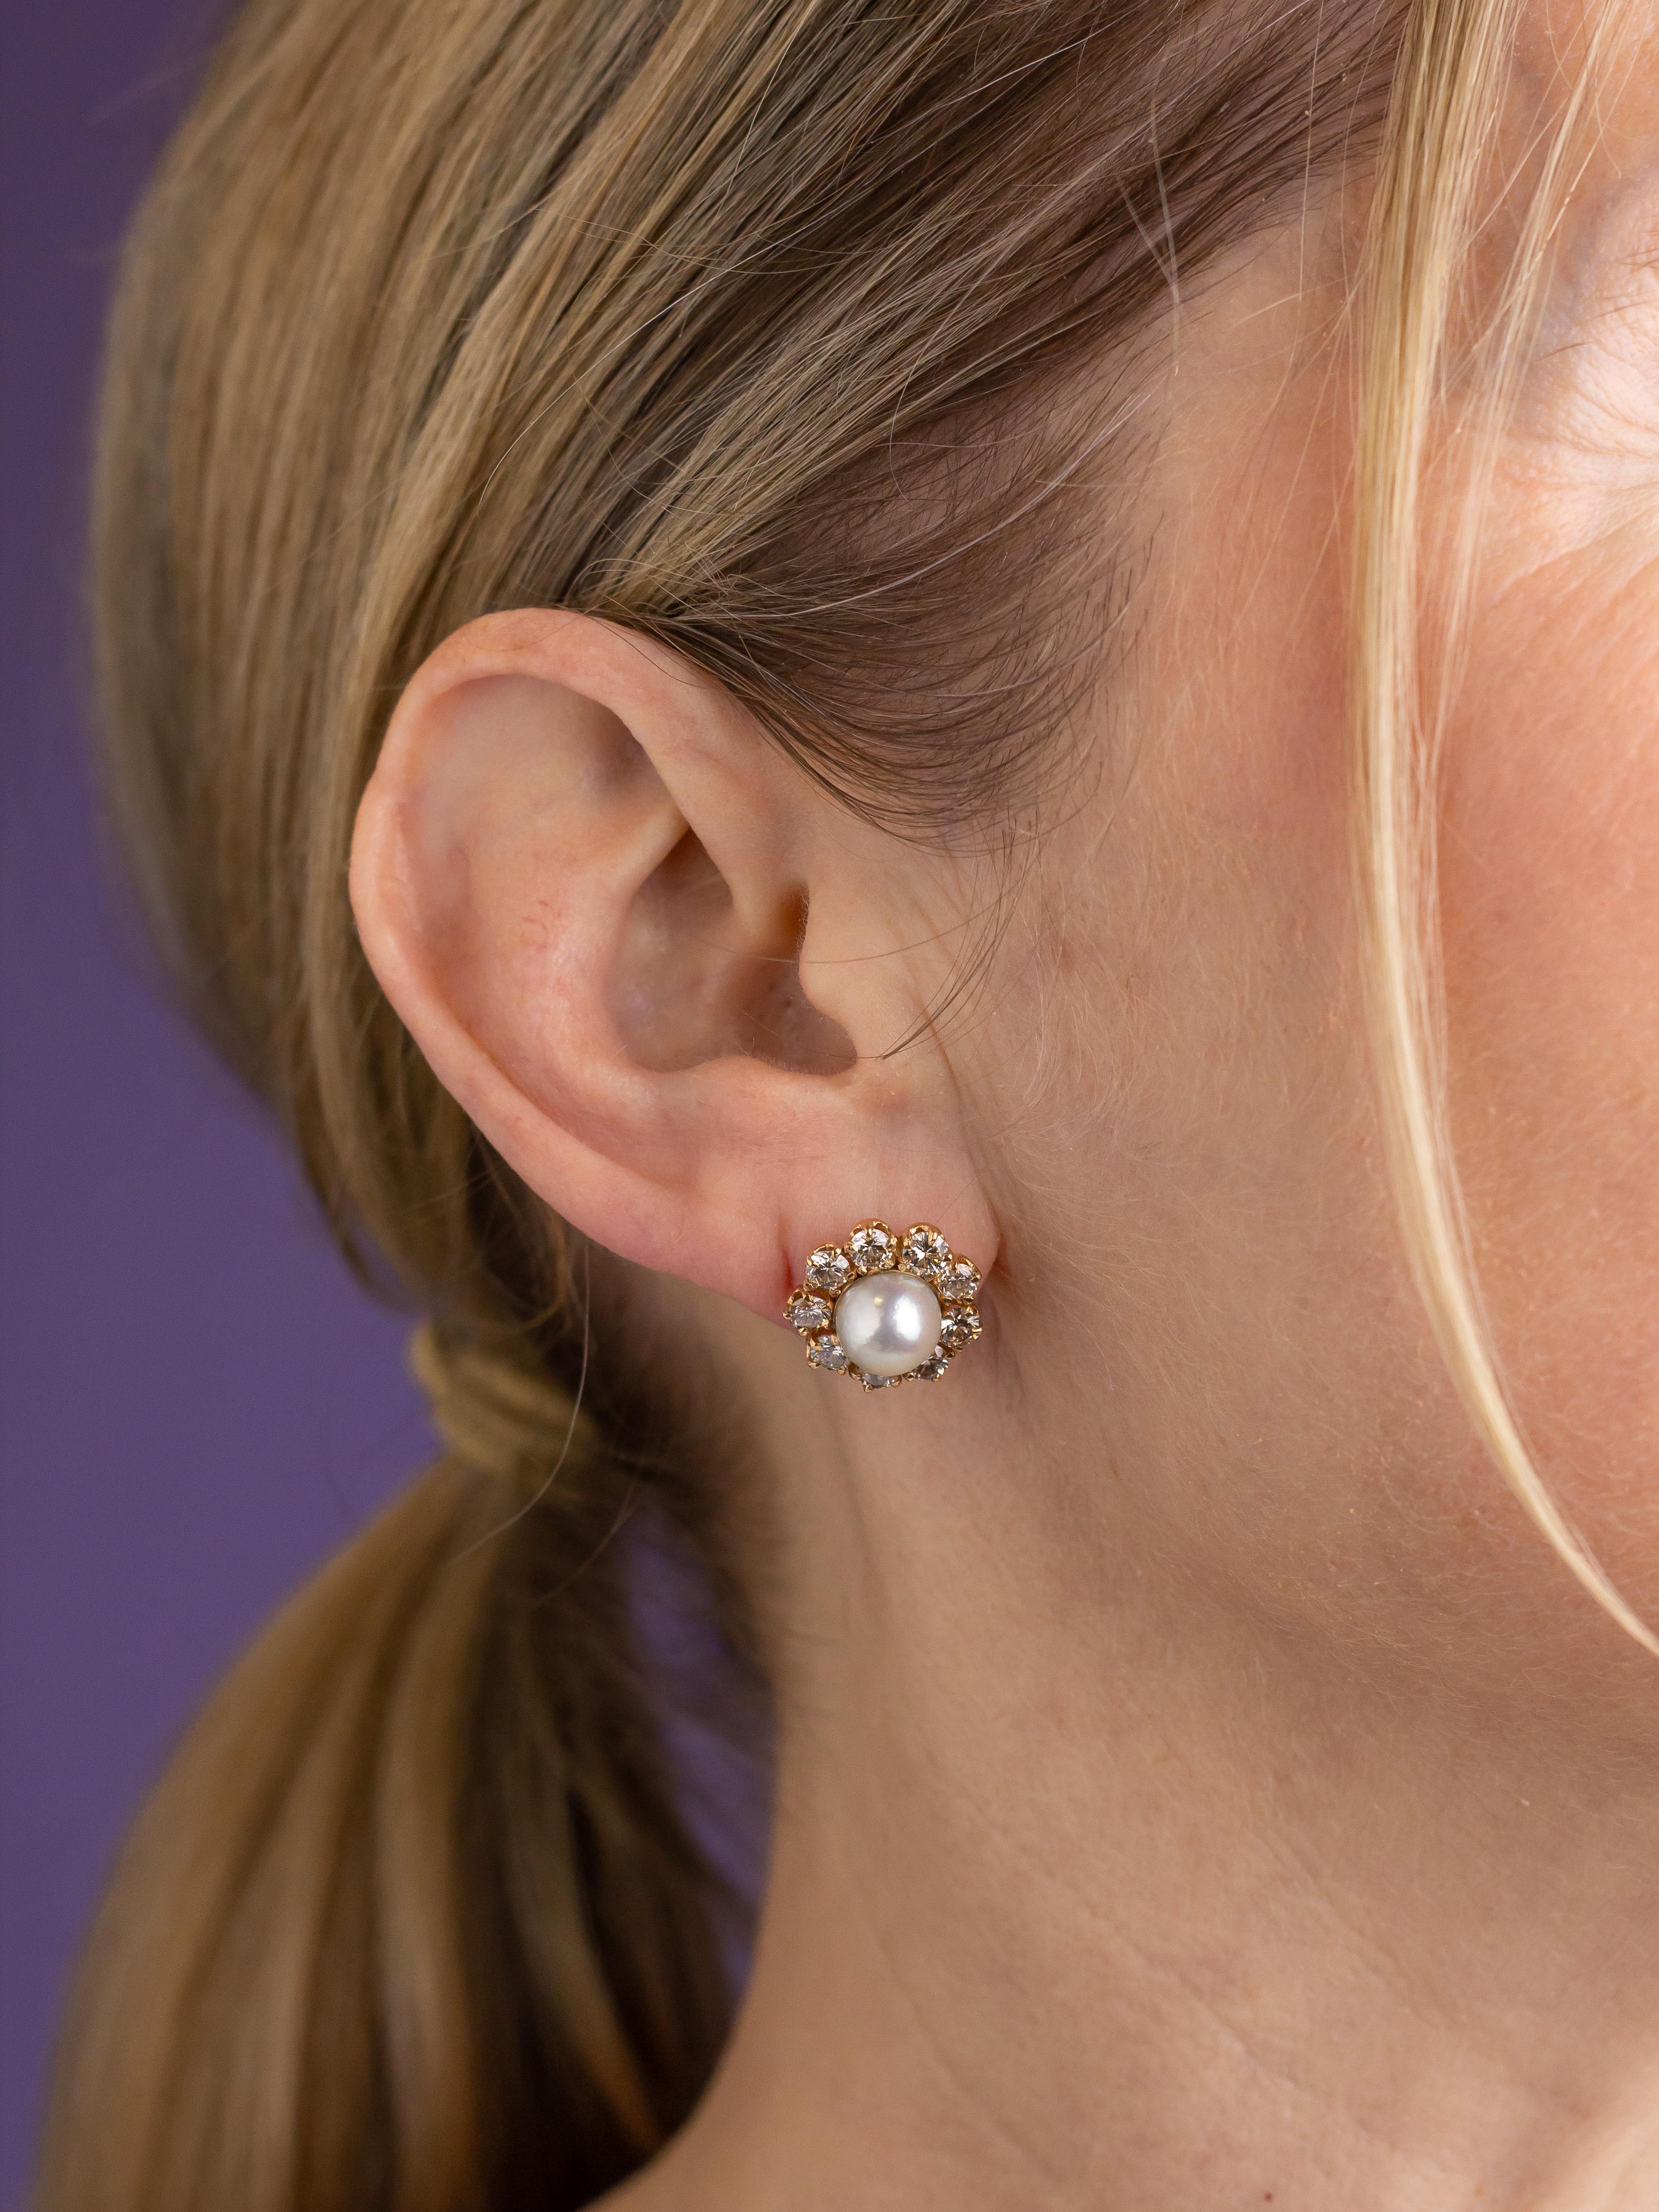 This delicate pair of stud earrings are in the form of a posy and are set with Akoya pearls and diamonds. The frames of the studs are crafted from 14 karat yellow gold and centre on a natural cultured Akoya pearl measuring 8.28 millimetres each.